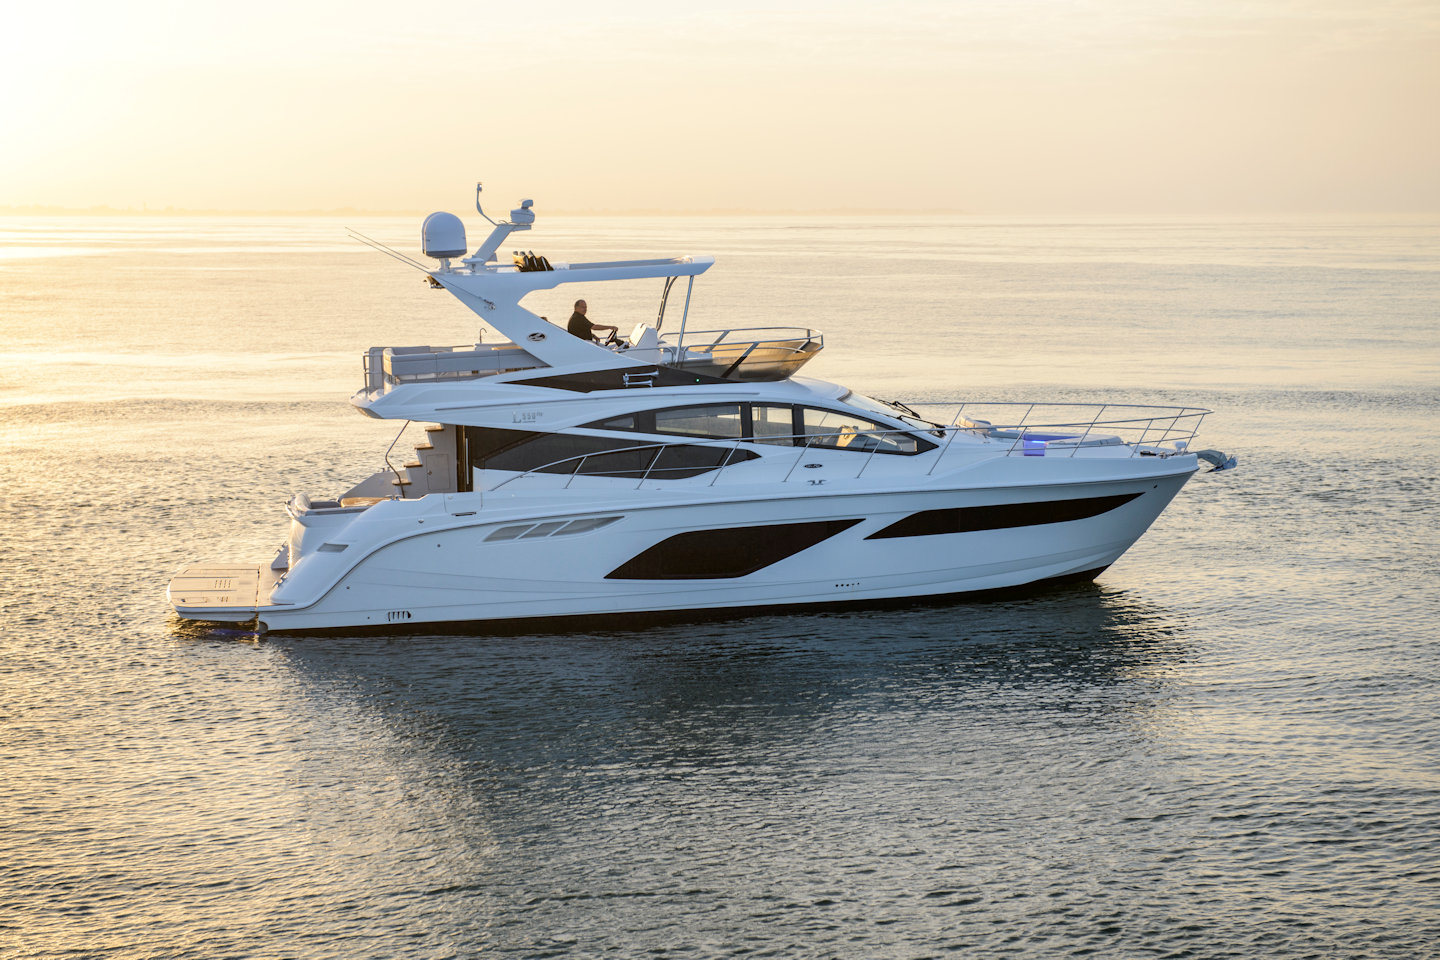 360 VR Virtual Tours of the Sea Ray L550 Fly